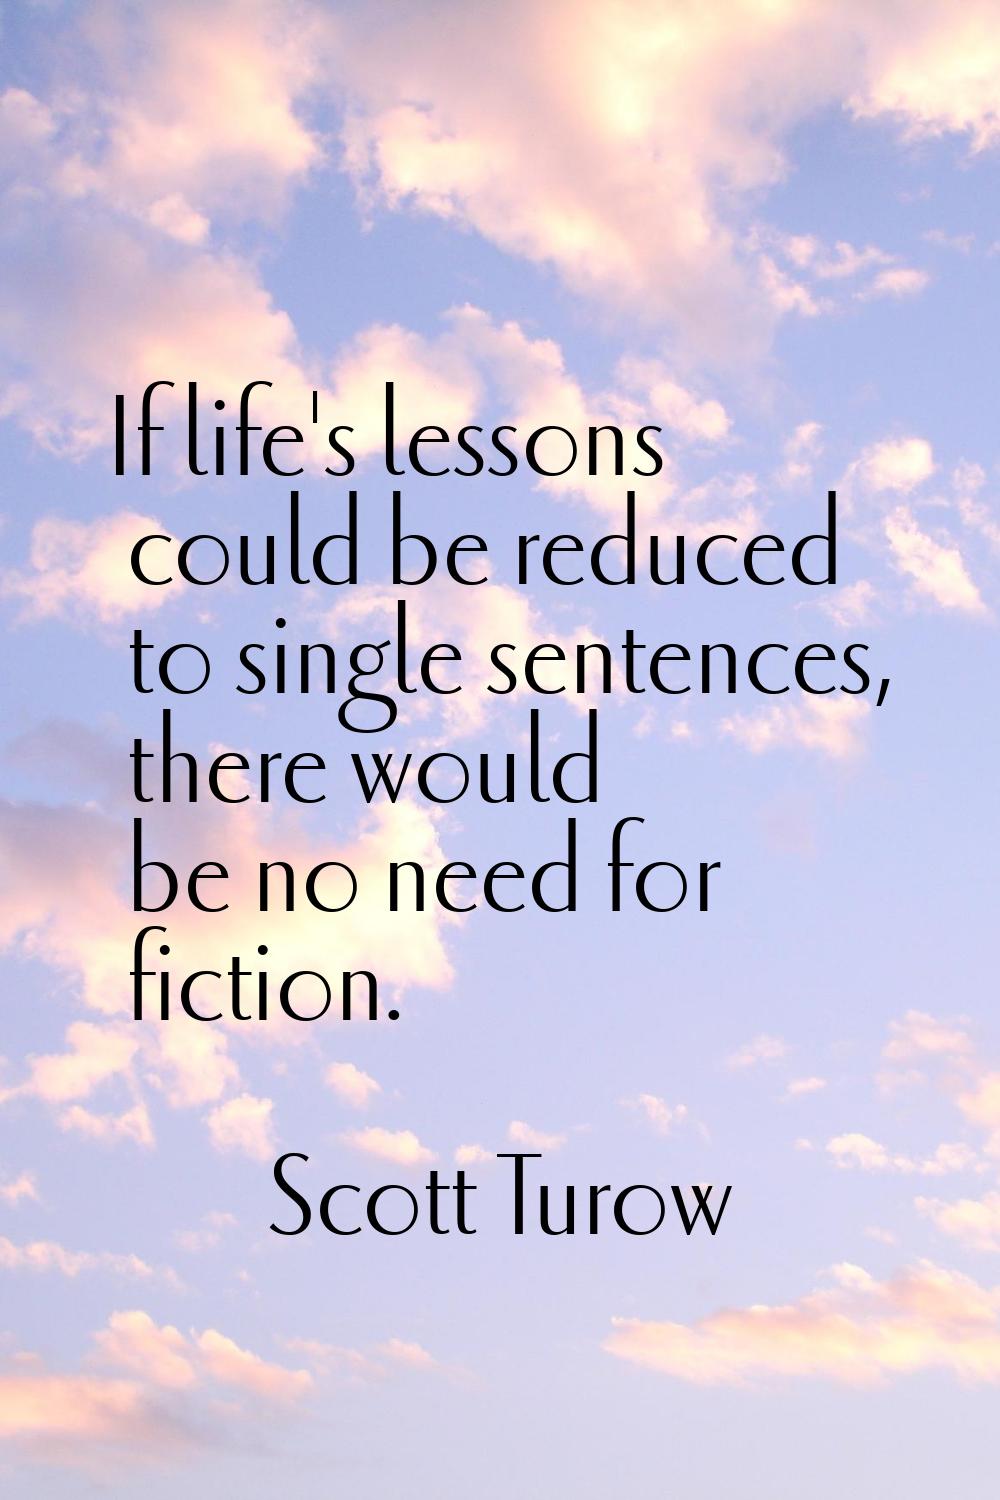 If life's lessons could be reduced to single sentences, there would be no need for fiction.